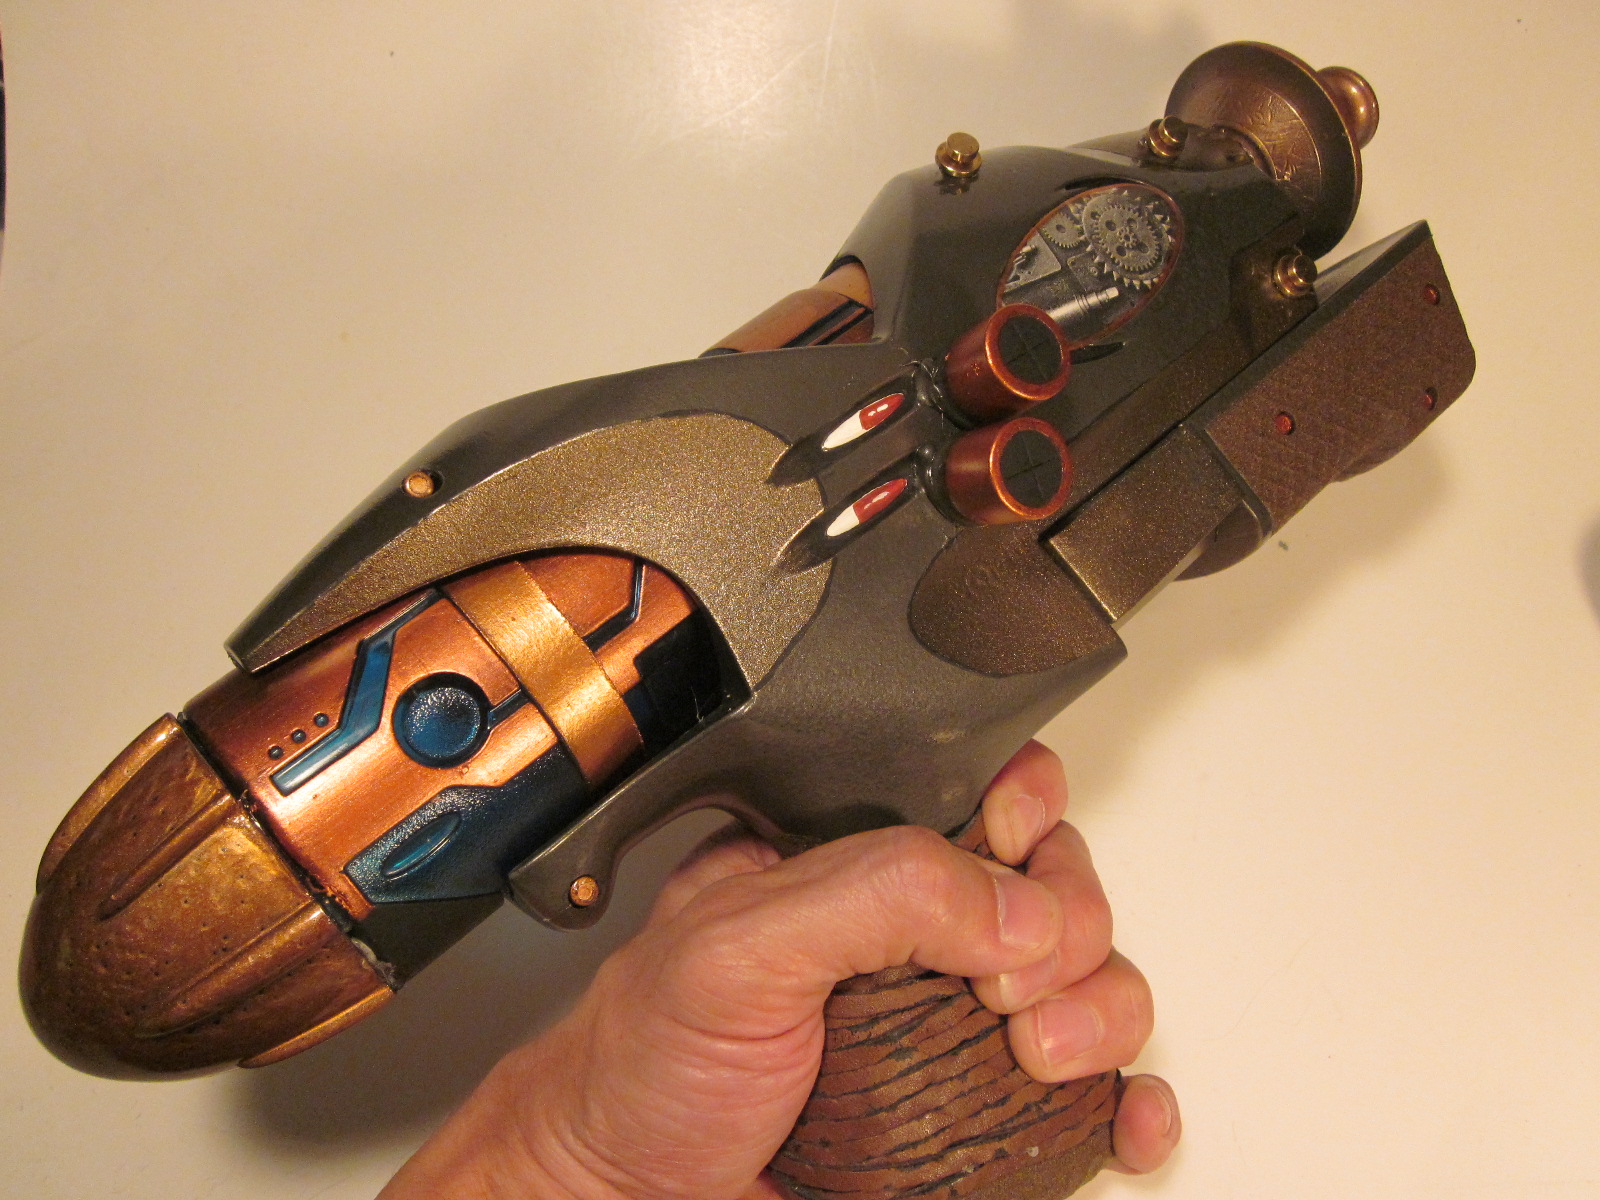 Steampunk Revolver Raygun with lights, full metal body plus wooden grip.  Made this from an older model. Which one do you like better? :  r/sciencefiction